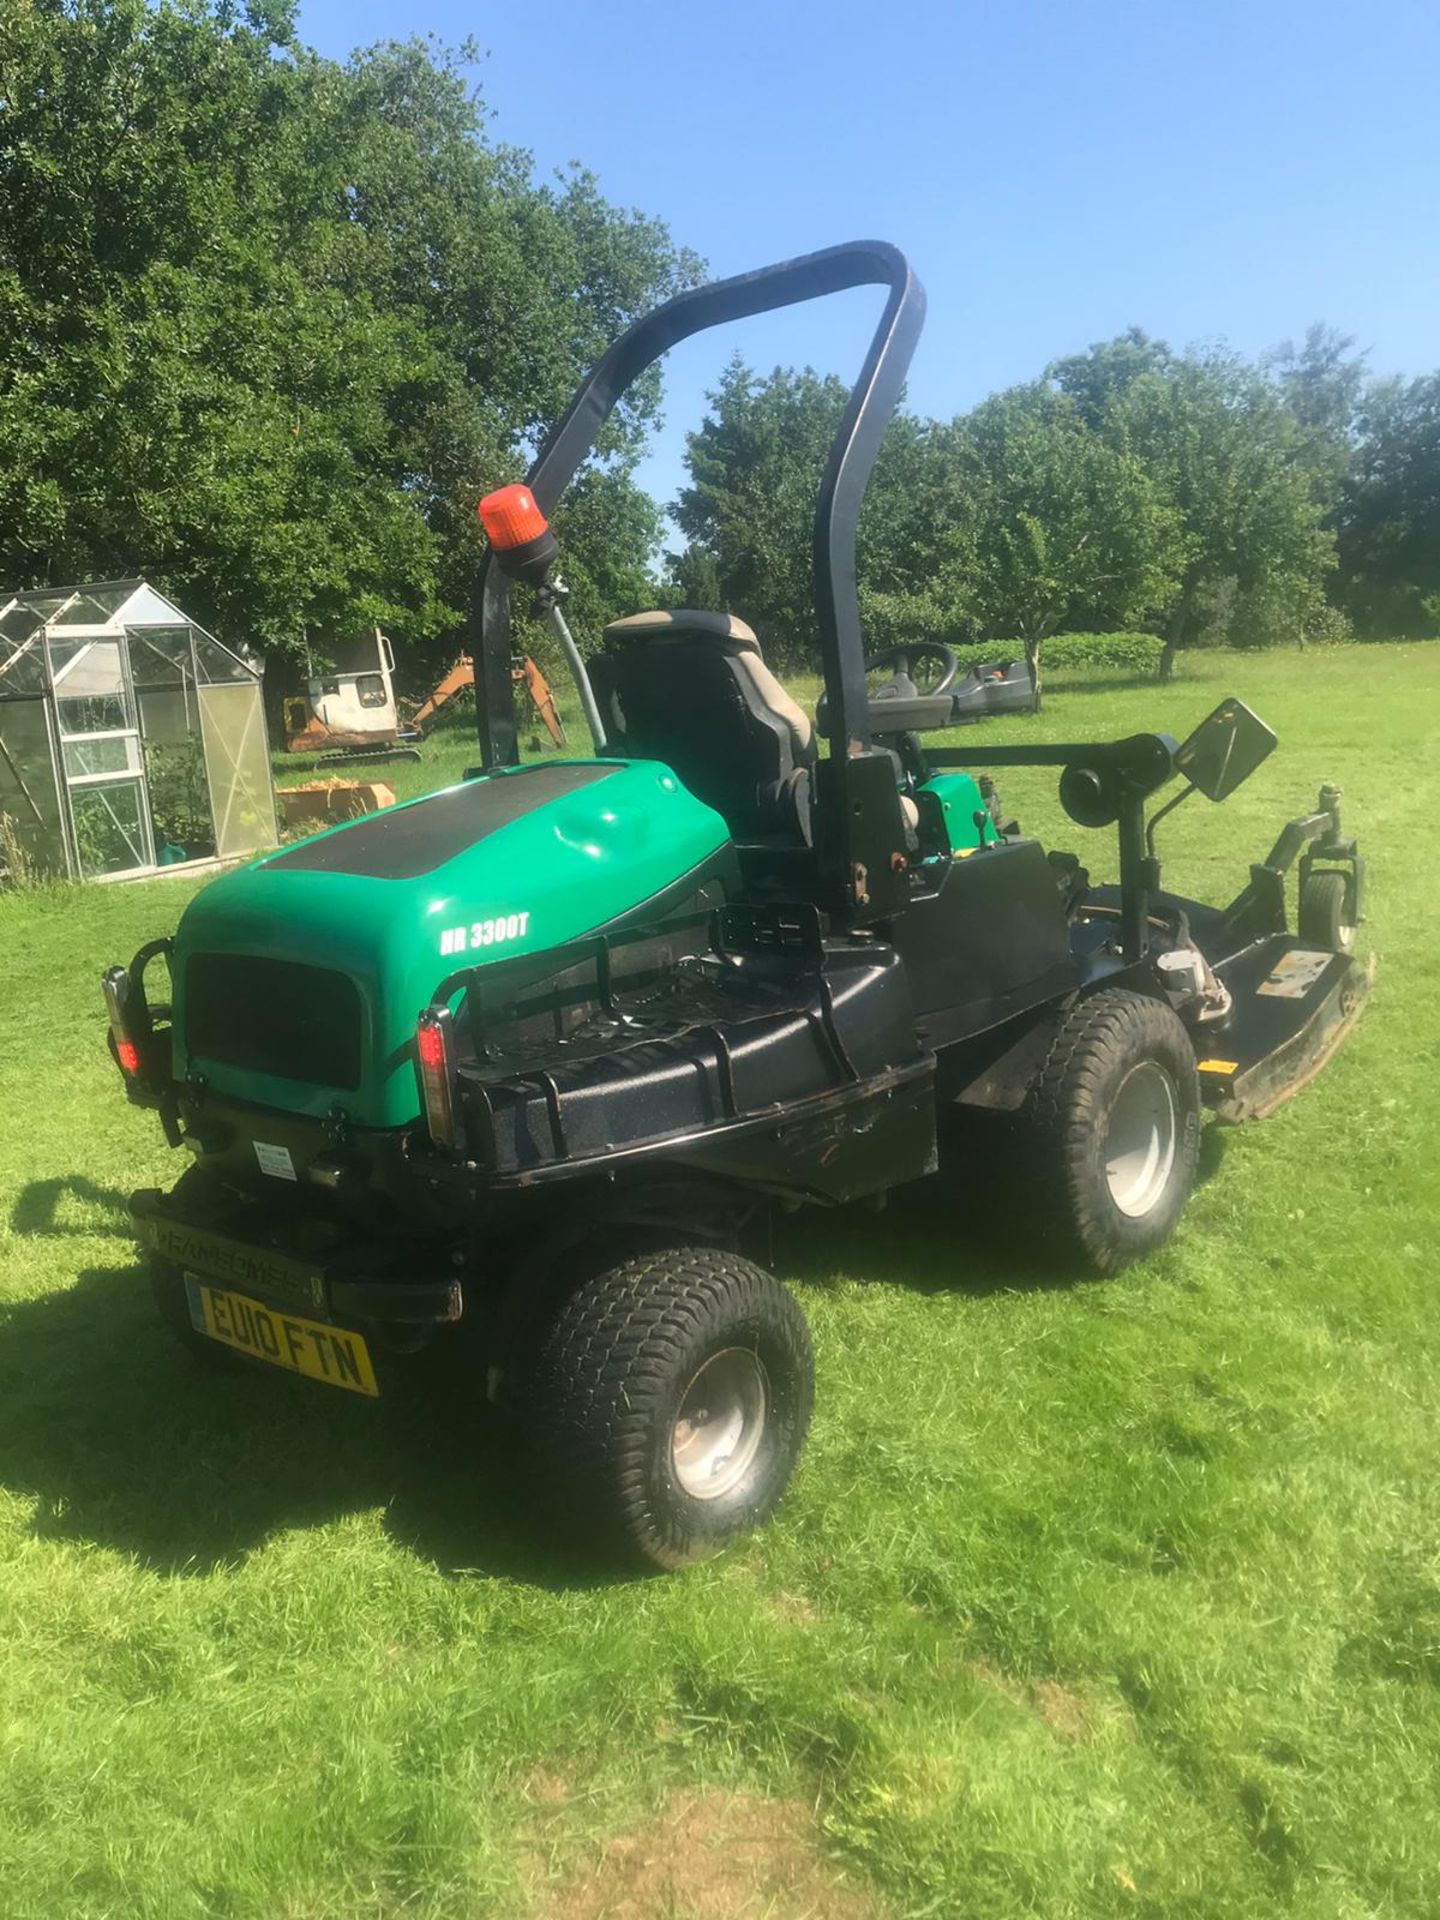 2010/10 REG RANSOMES HR 3300T OUTFRONT MOWER, RUNS, DRIVES AND CUTS *PLUS VAT* - Image 4 of 4